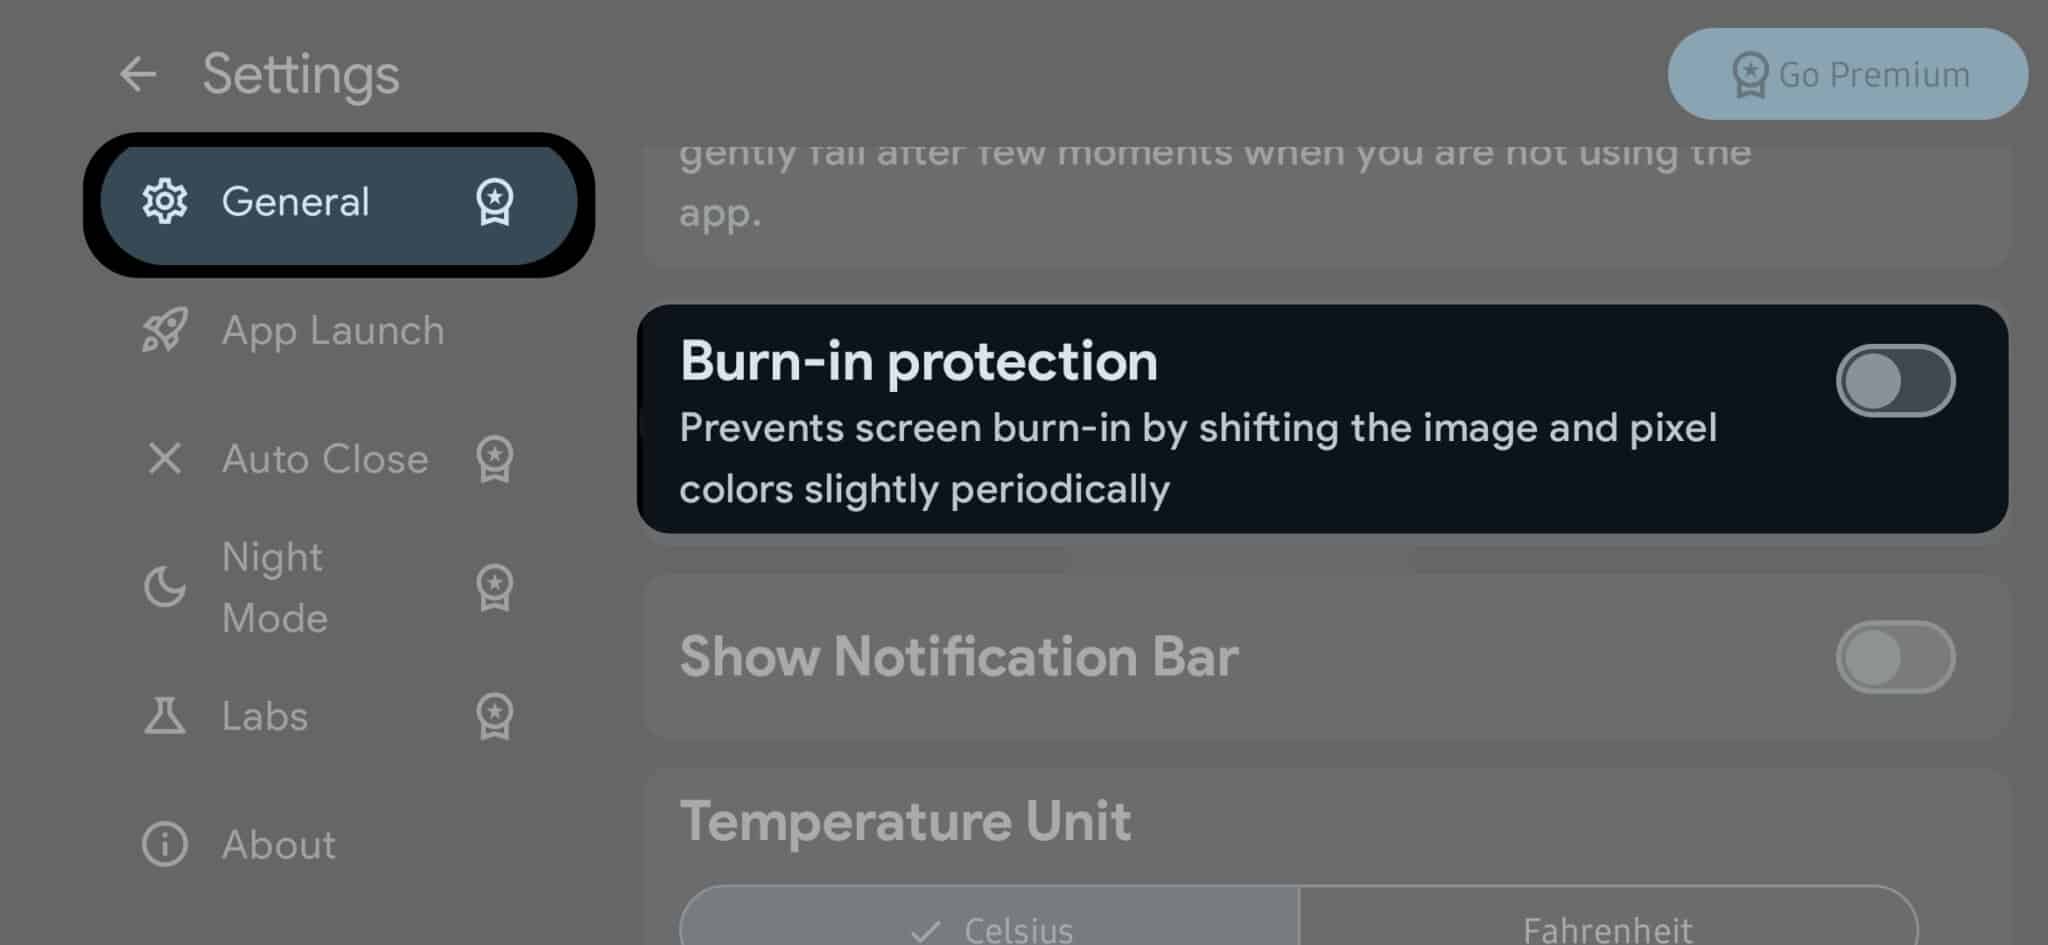 tap-general-toggle-on-burn-in-protection-in-standby-mode-pro-app-scaled